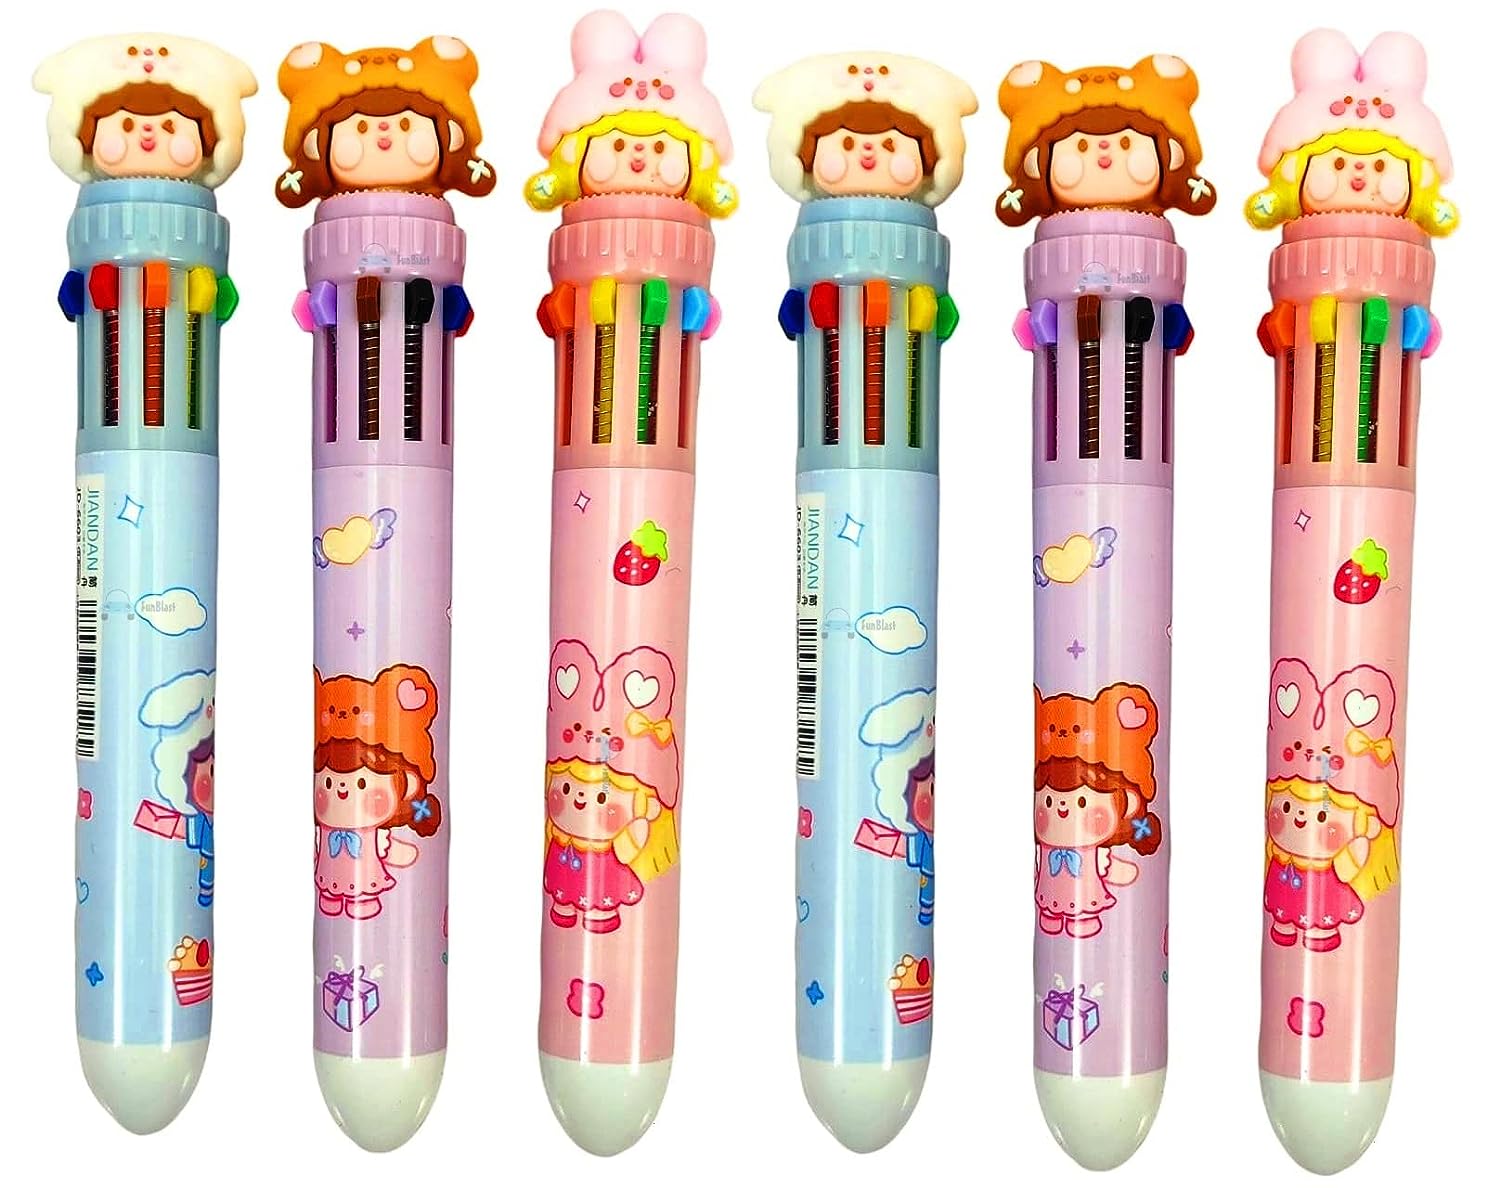 10 In 1 Pens For Kids Ball Pen Set For School & Office-Cartoon Pen For Office, School Stationery Items For Kids-Stationery Kit(Set Of 3)